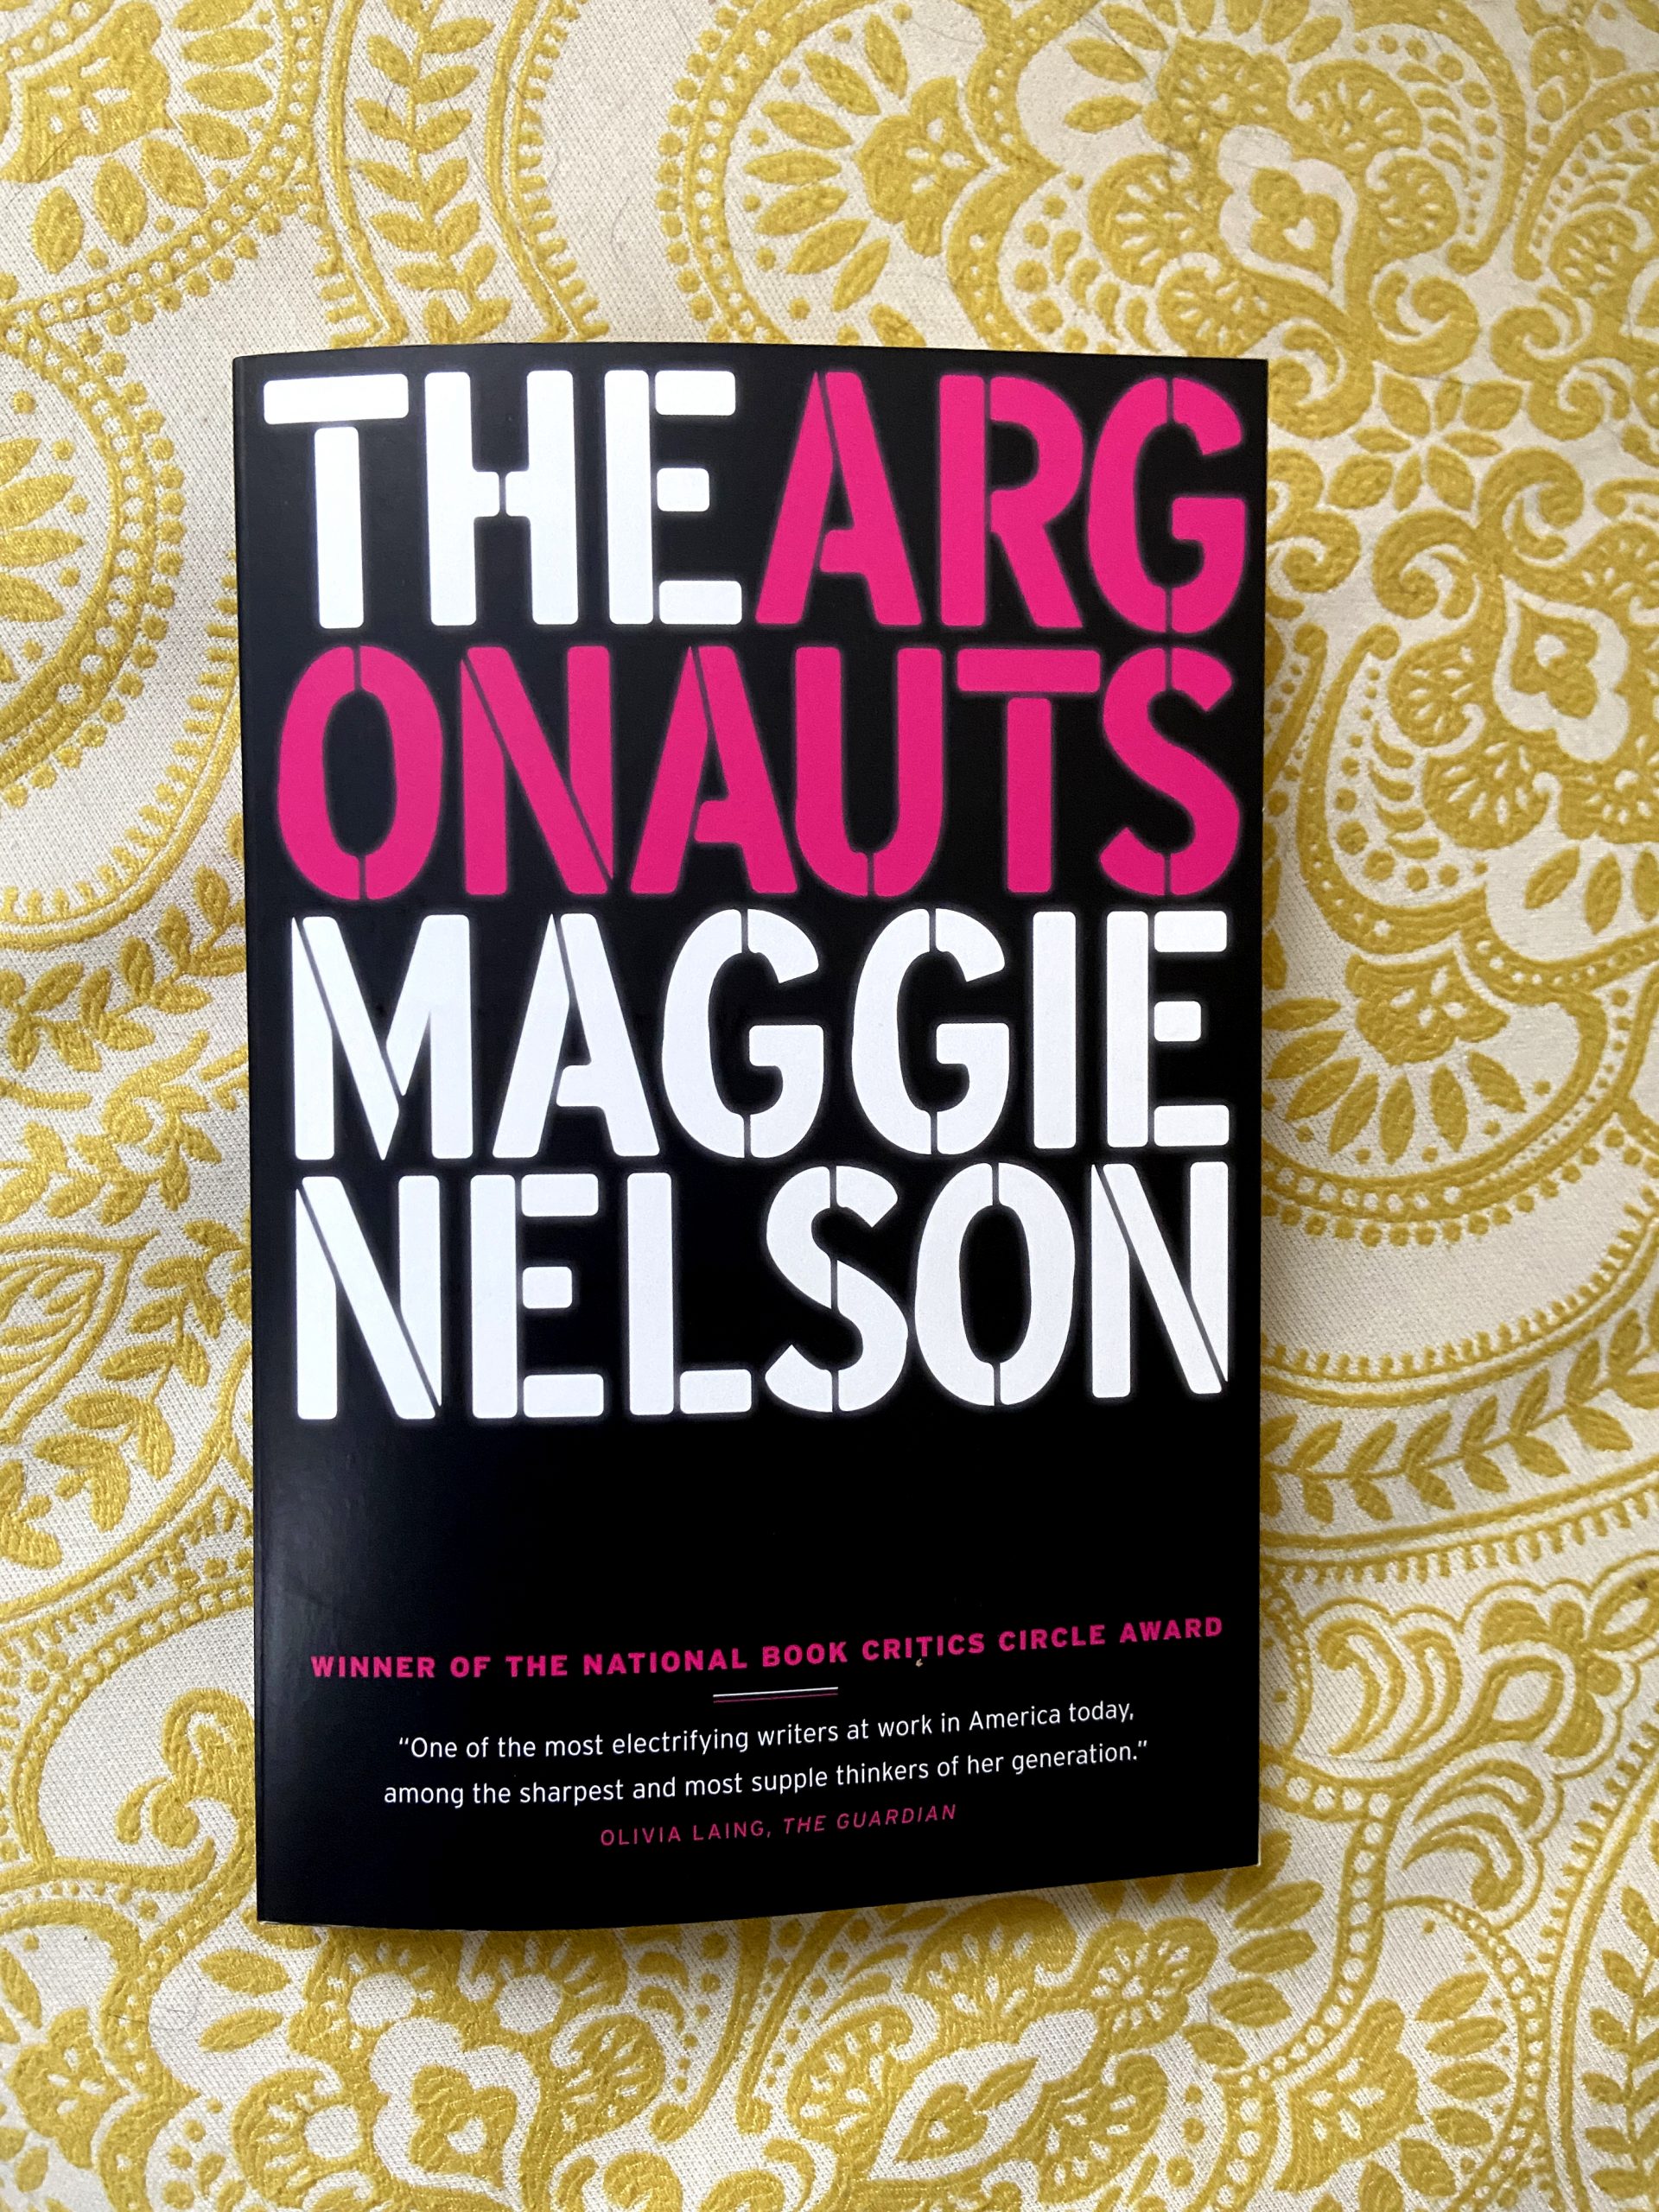 A book with the text "ARGONAUTS" in pink.